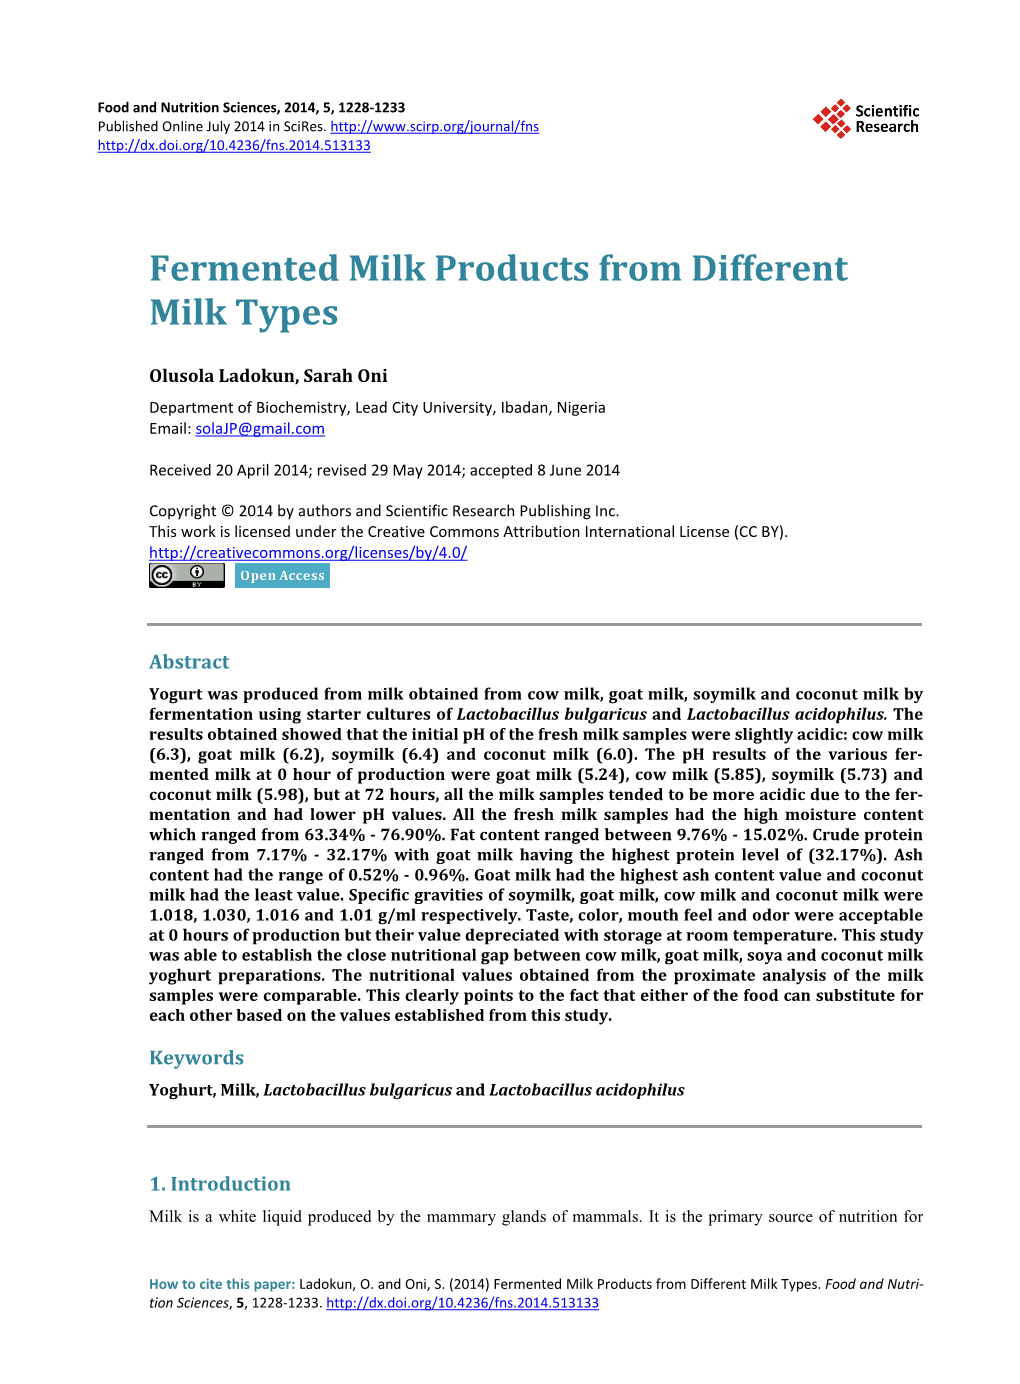 Fermented Milk Products from Different Milk Types